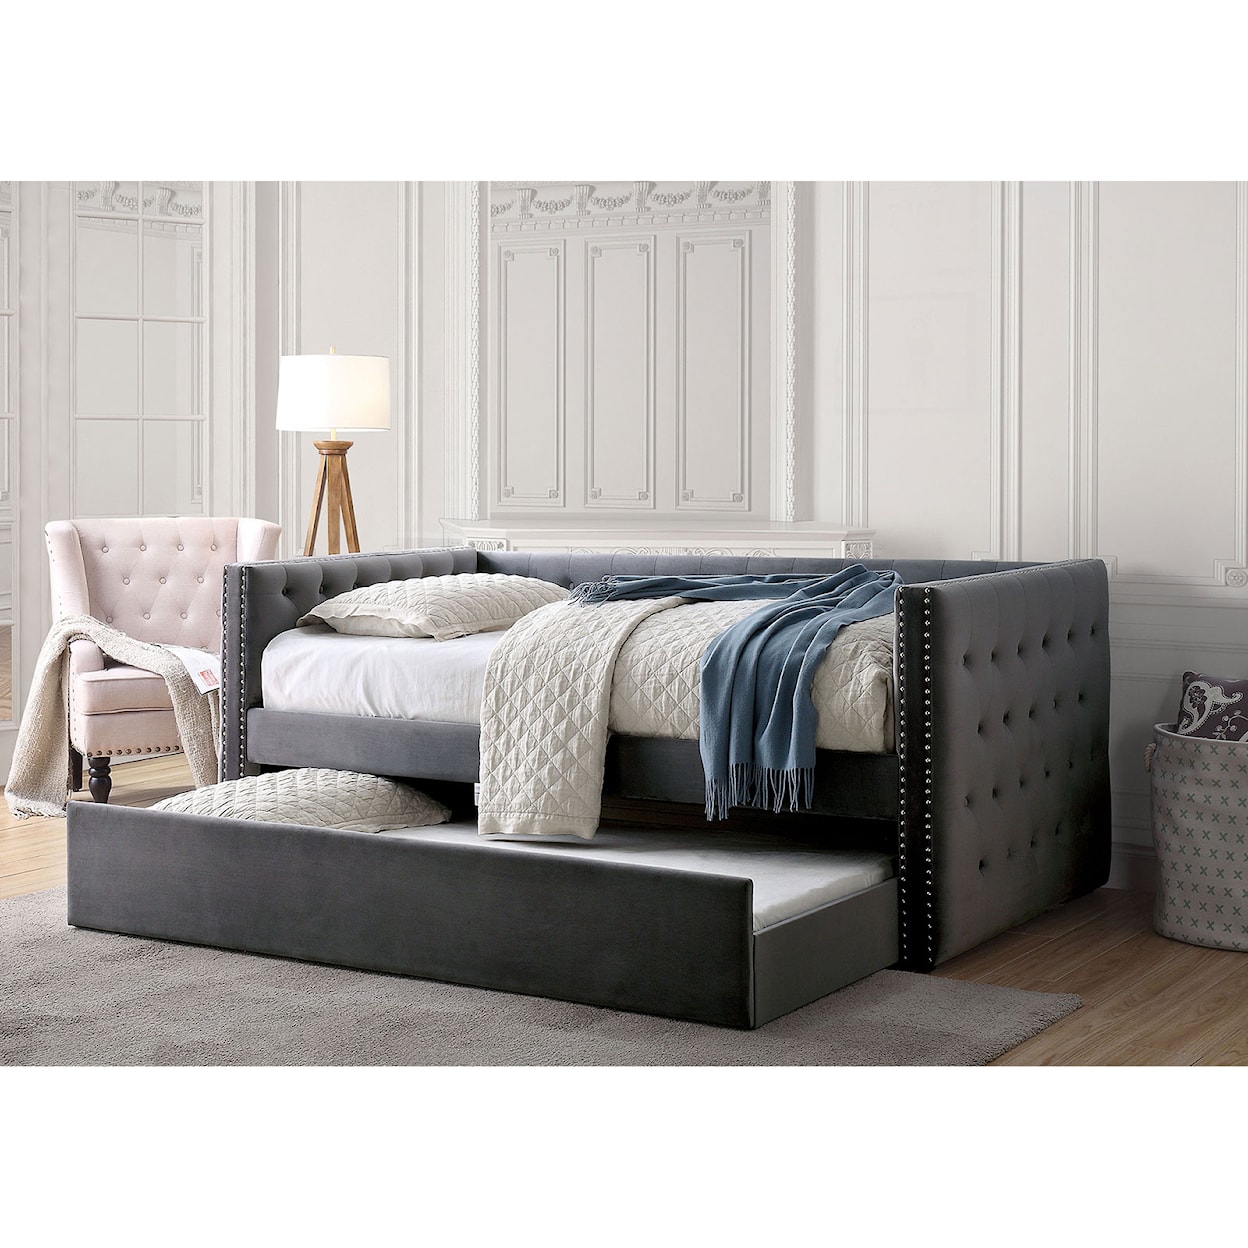 Furniture of America Susanna Daybed w/ Trundle